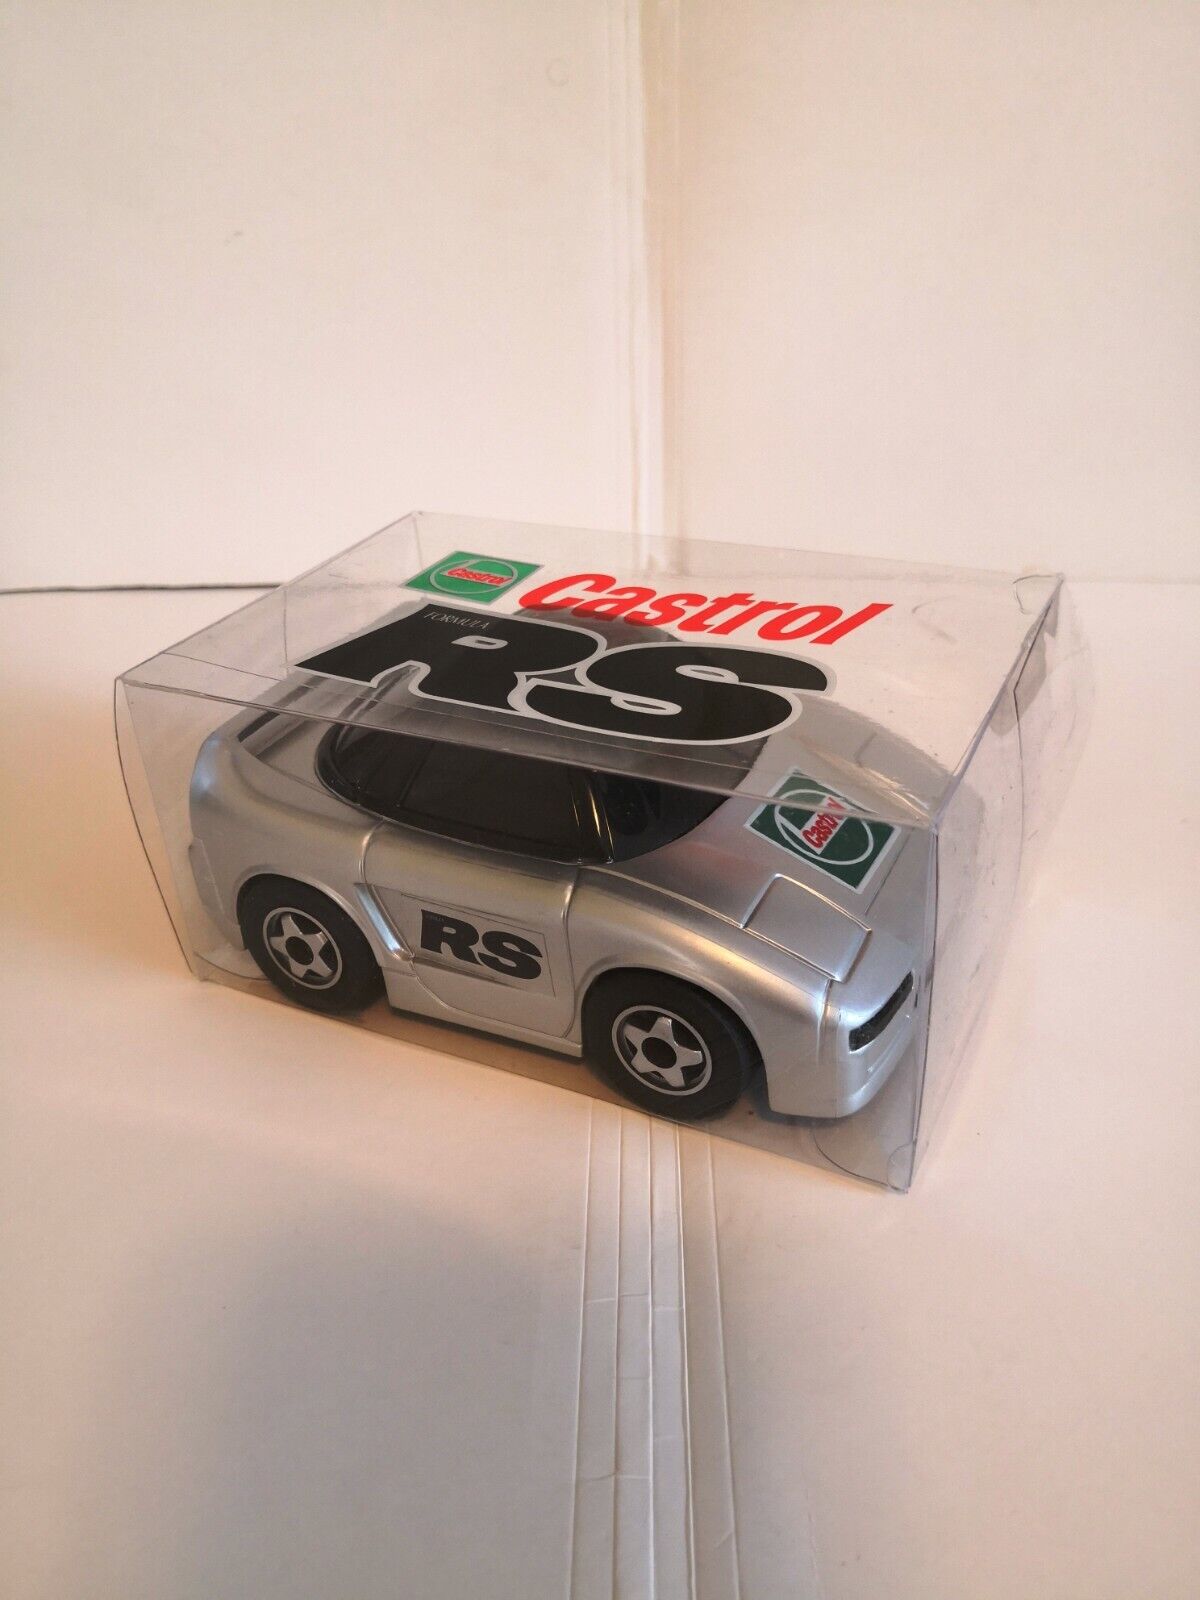 Castrol Rs Motor Oil Promotional Toy Car (nsx) Air Freshener W/ Light From '90s